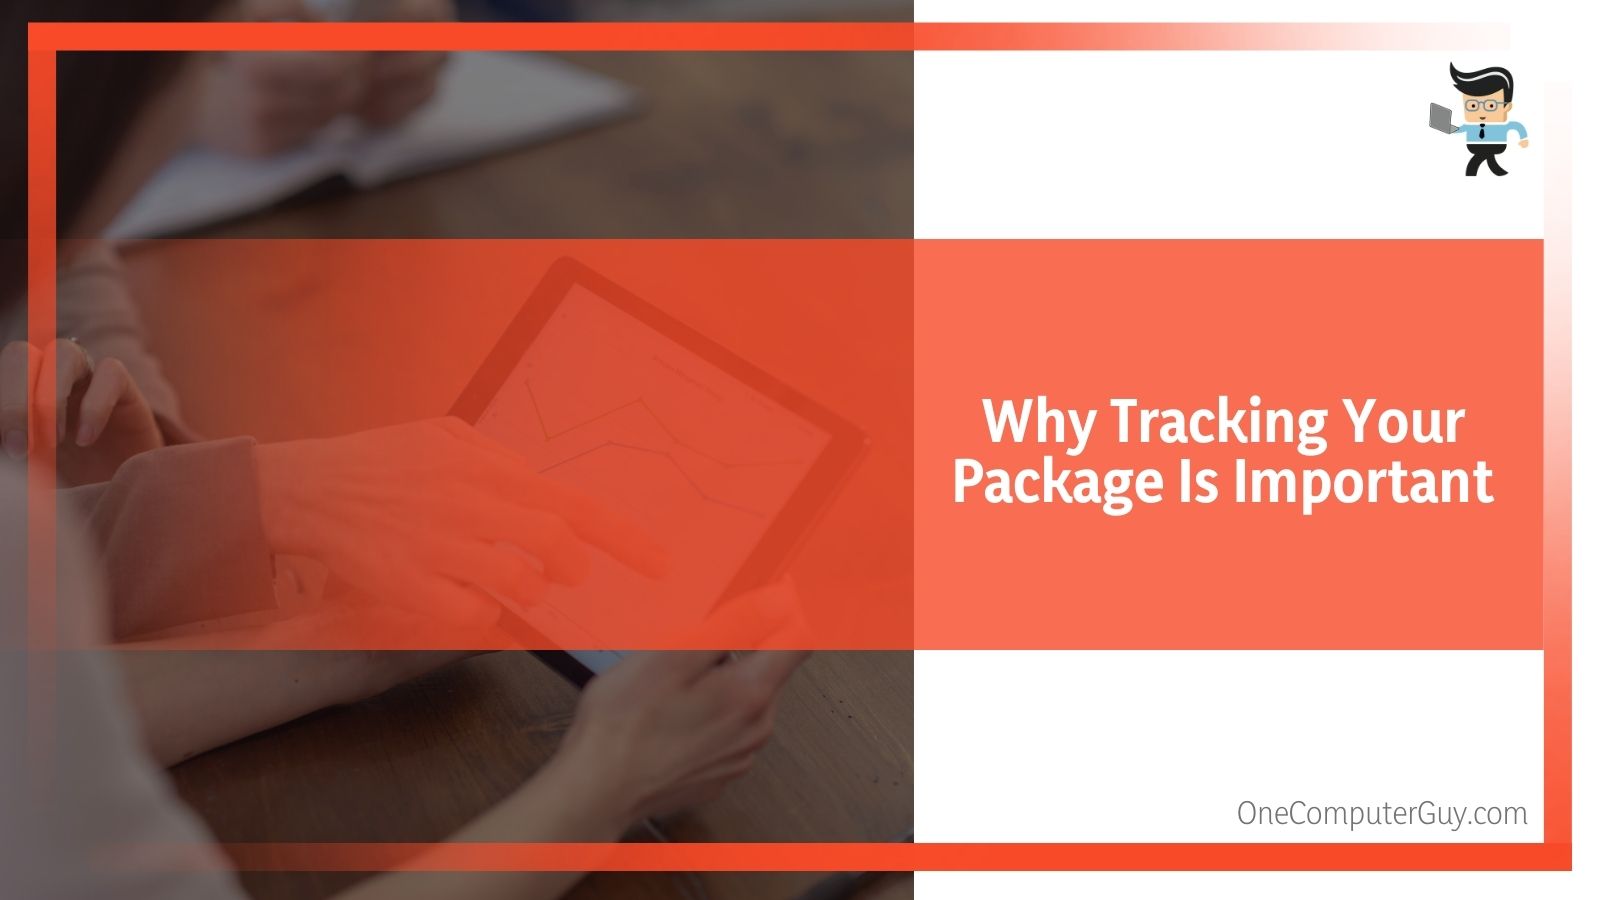 Why Tracking Your Package Is Important